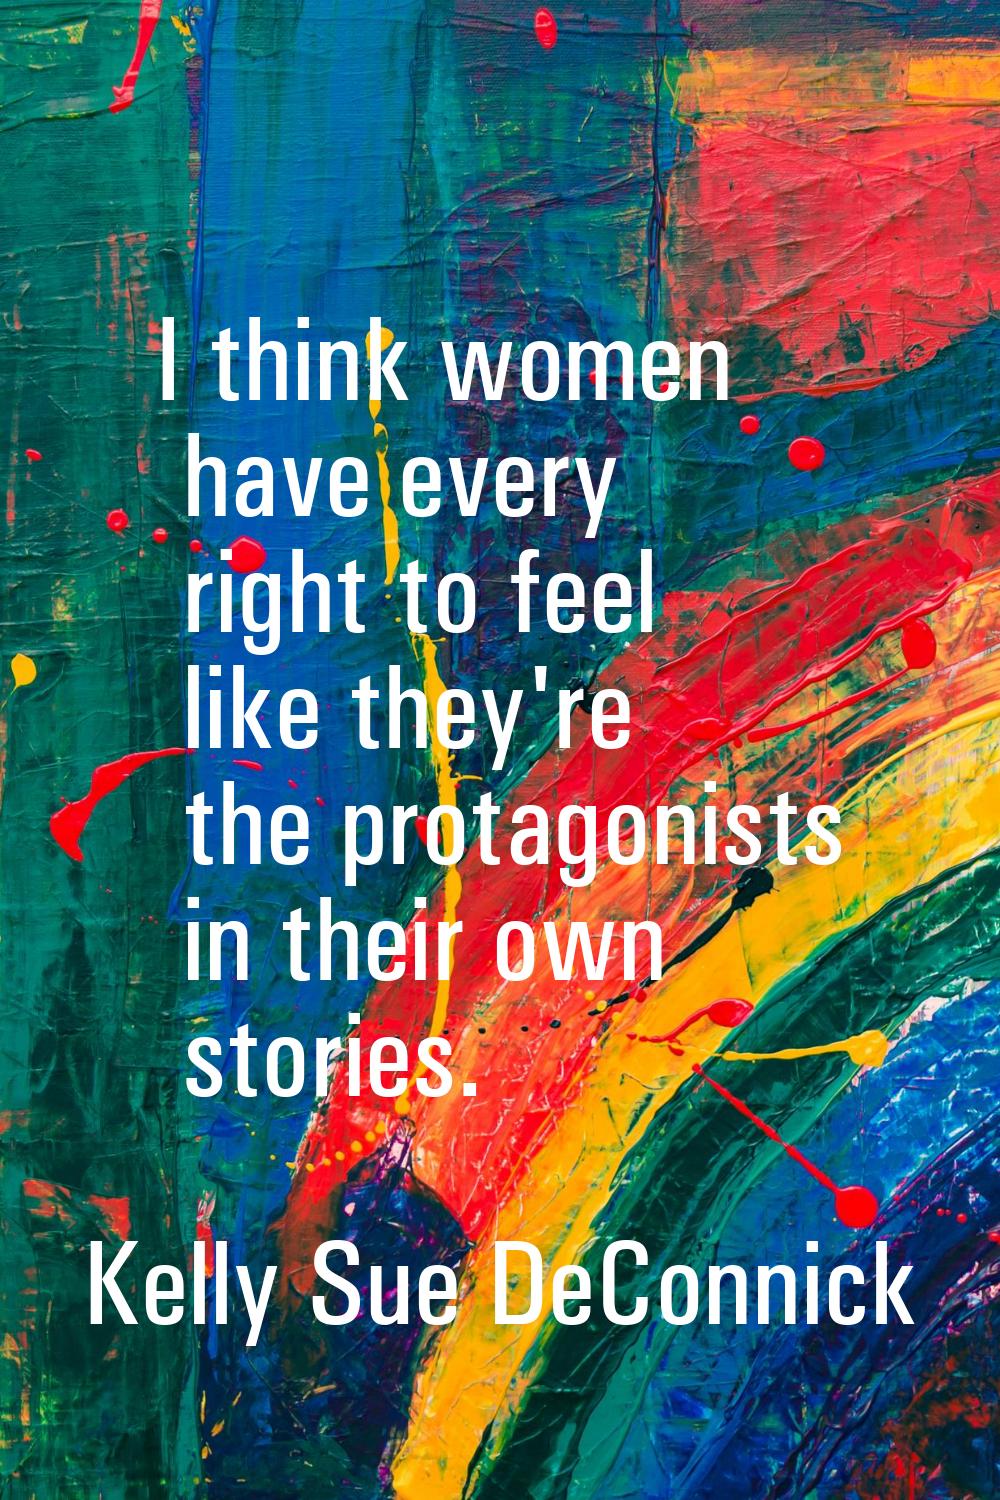 I think women have every right to feel like they're the protagonists in their own stories.